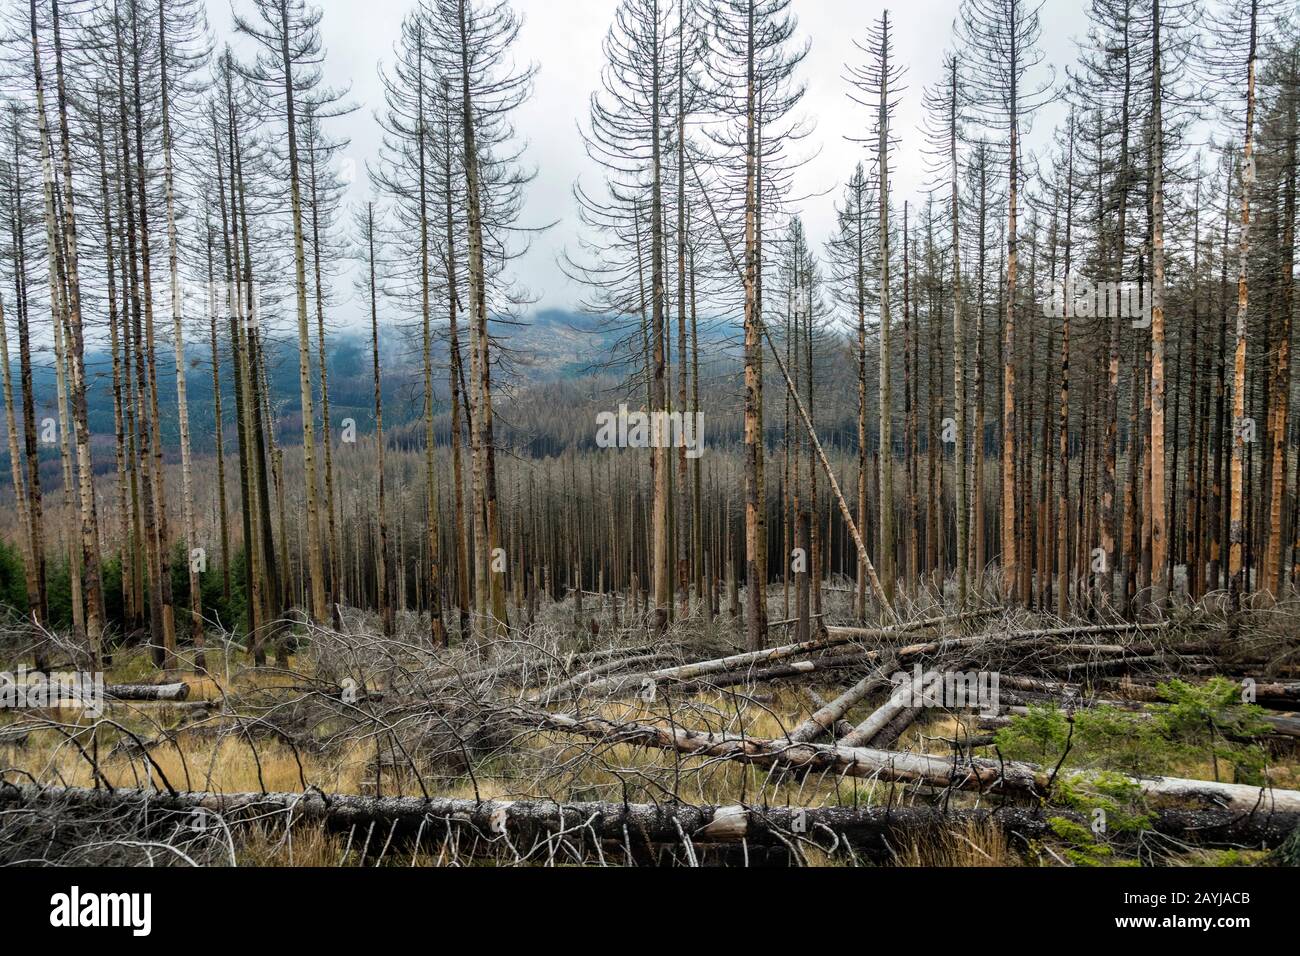 forest damage caused by dryness and bark beetle infestation, Germany, Lower Saxony, Harz National Park Stock Photo